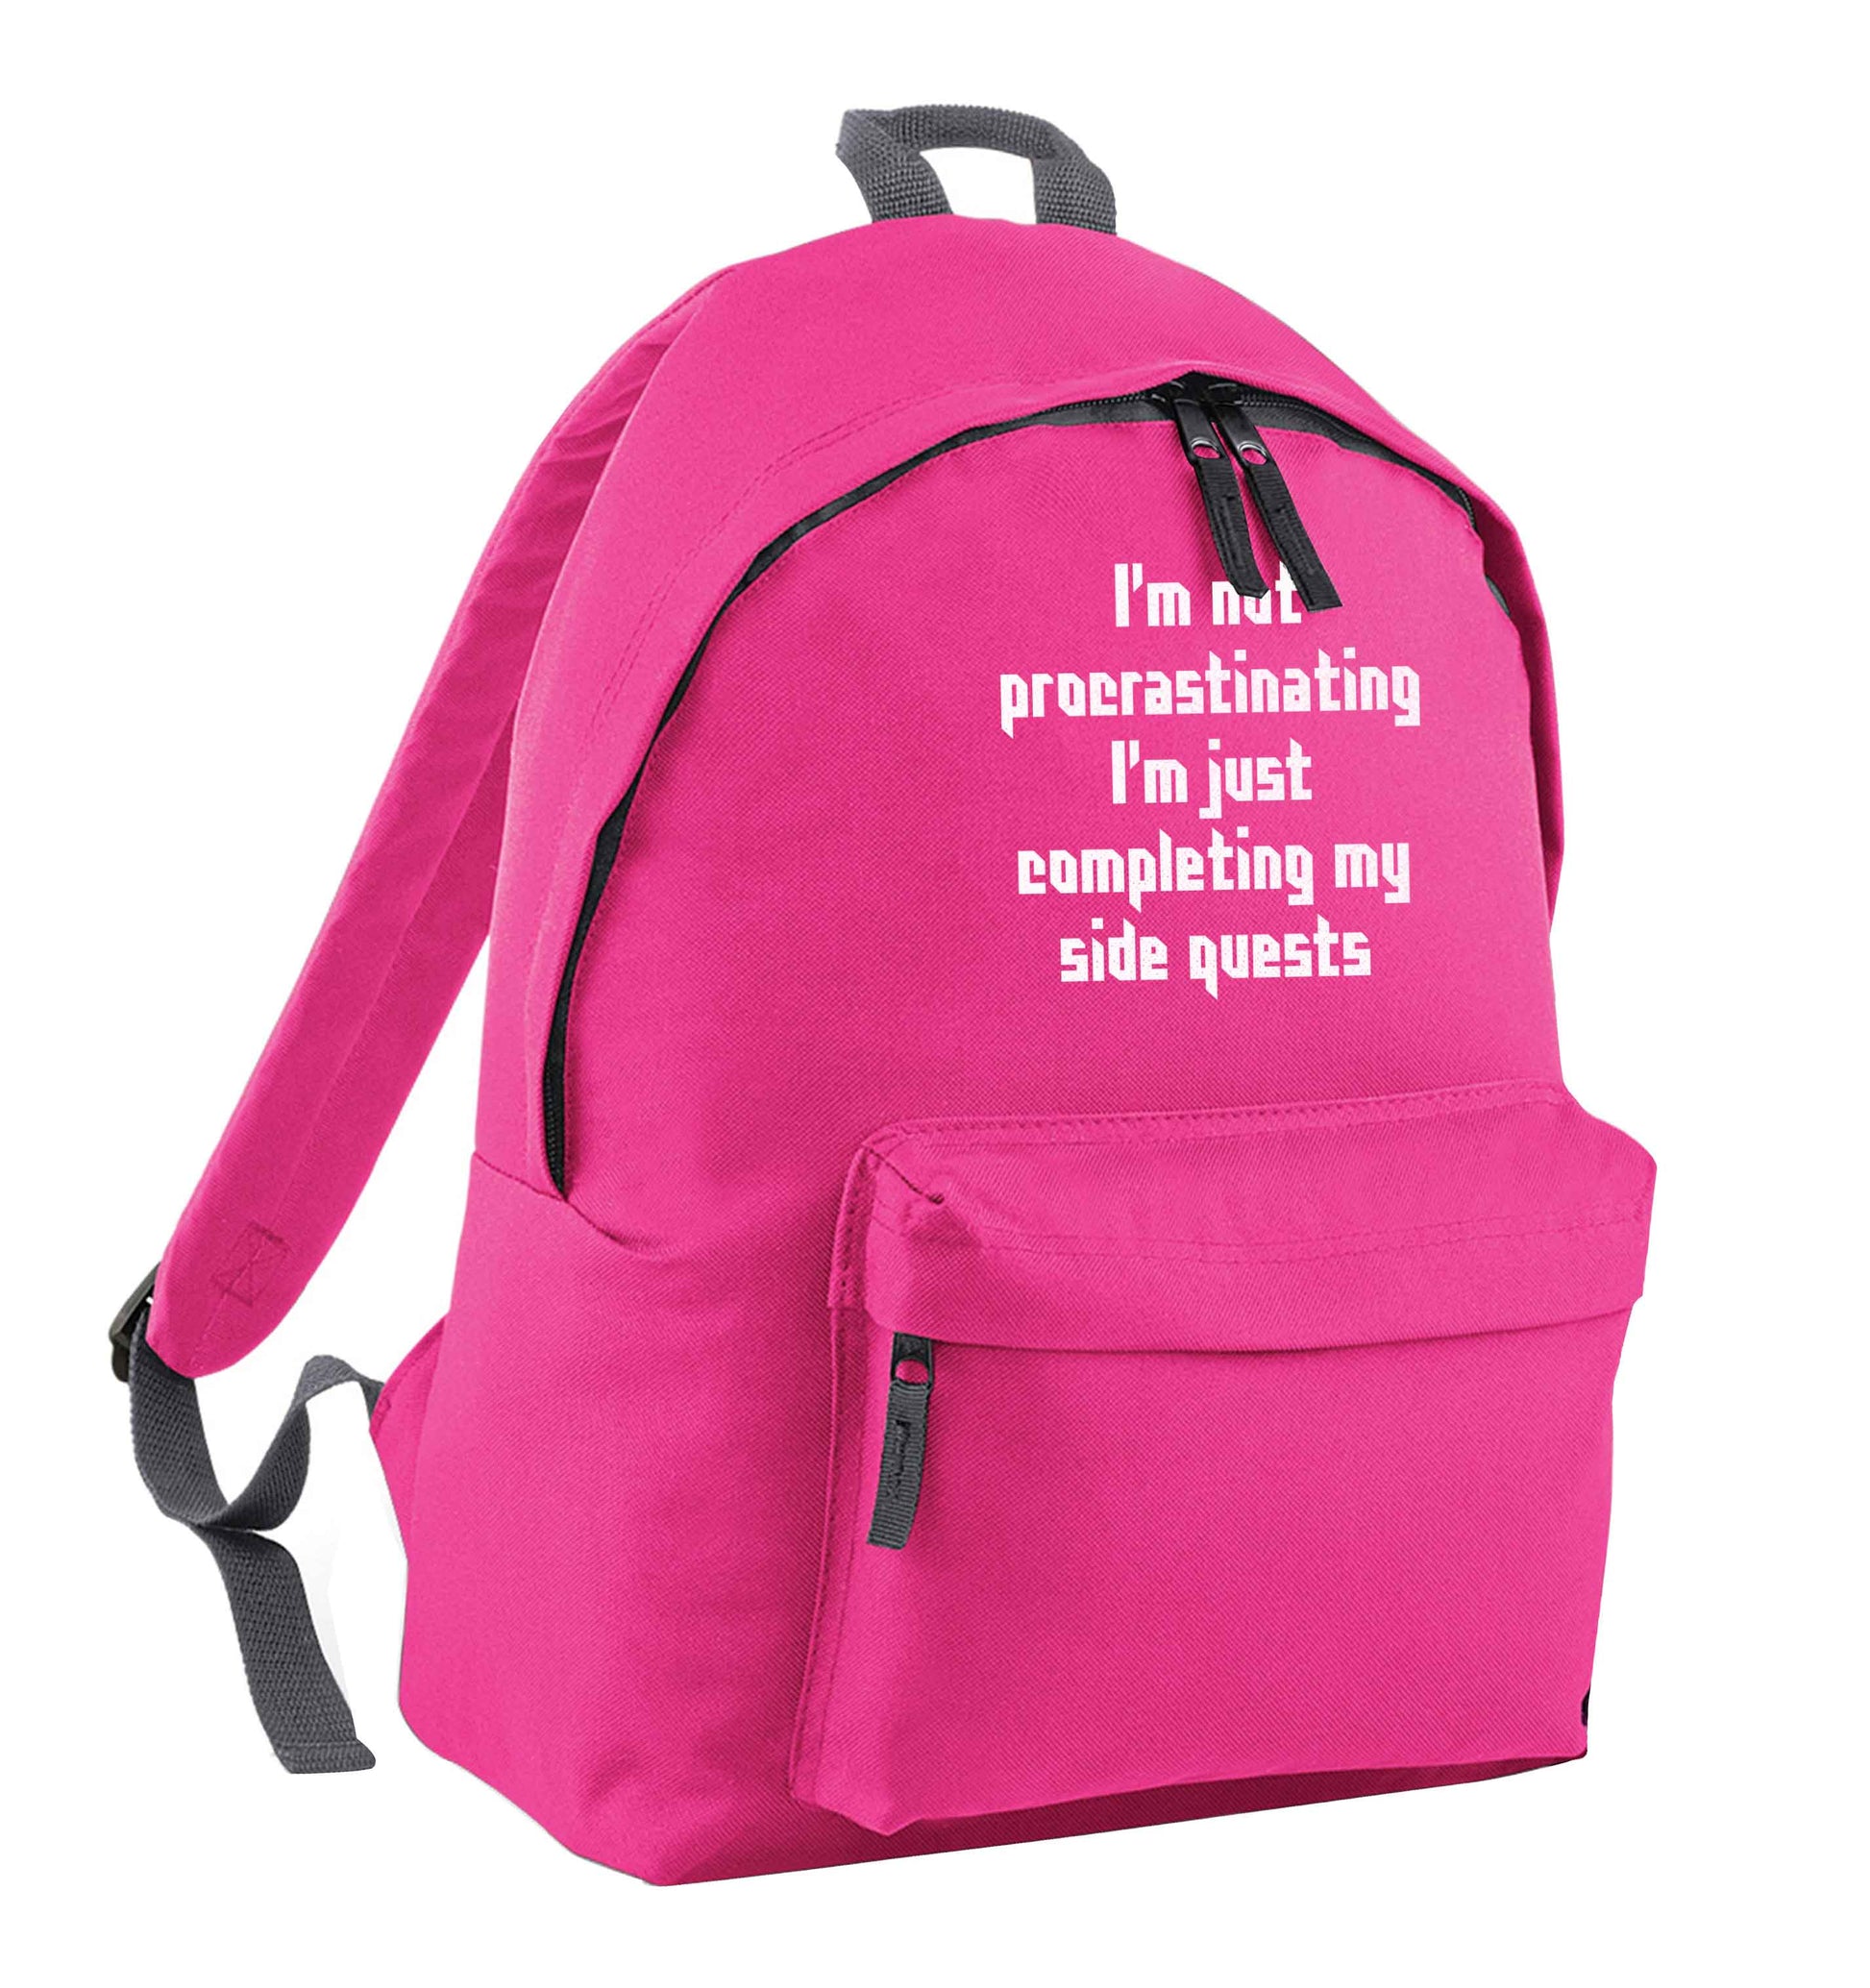 I'm not procrastinating I'm just completing my side quests pink adults backpack